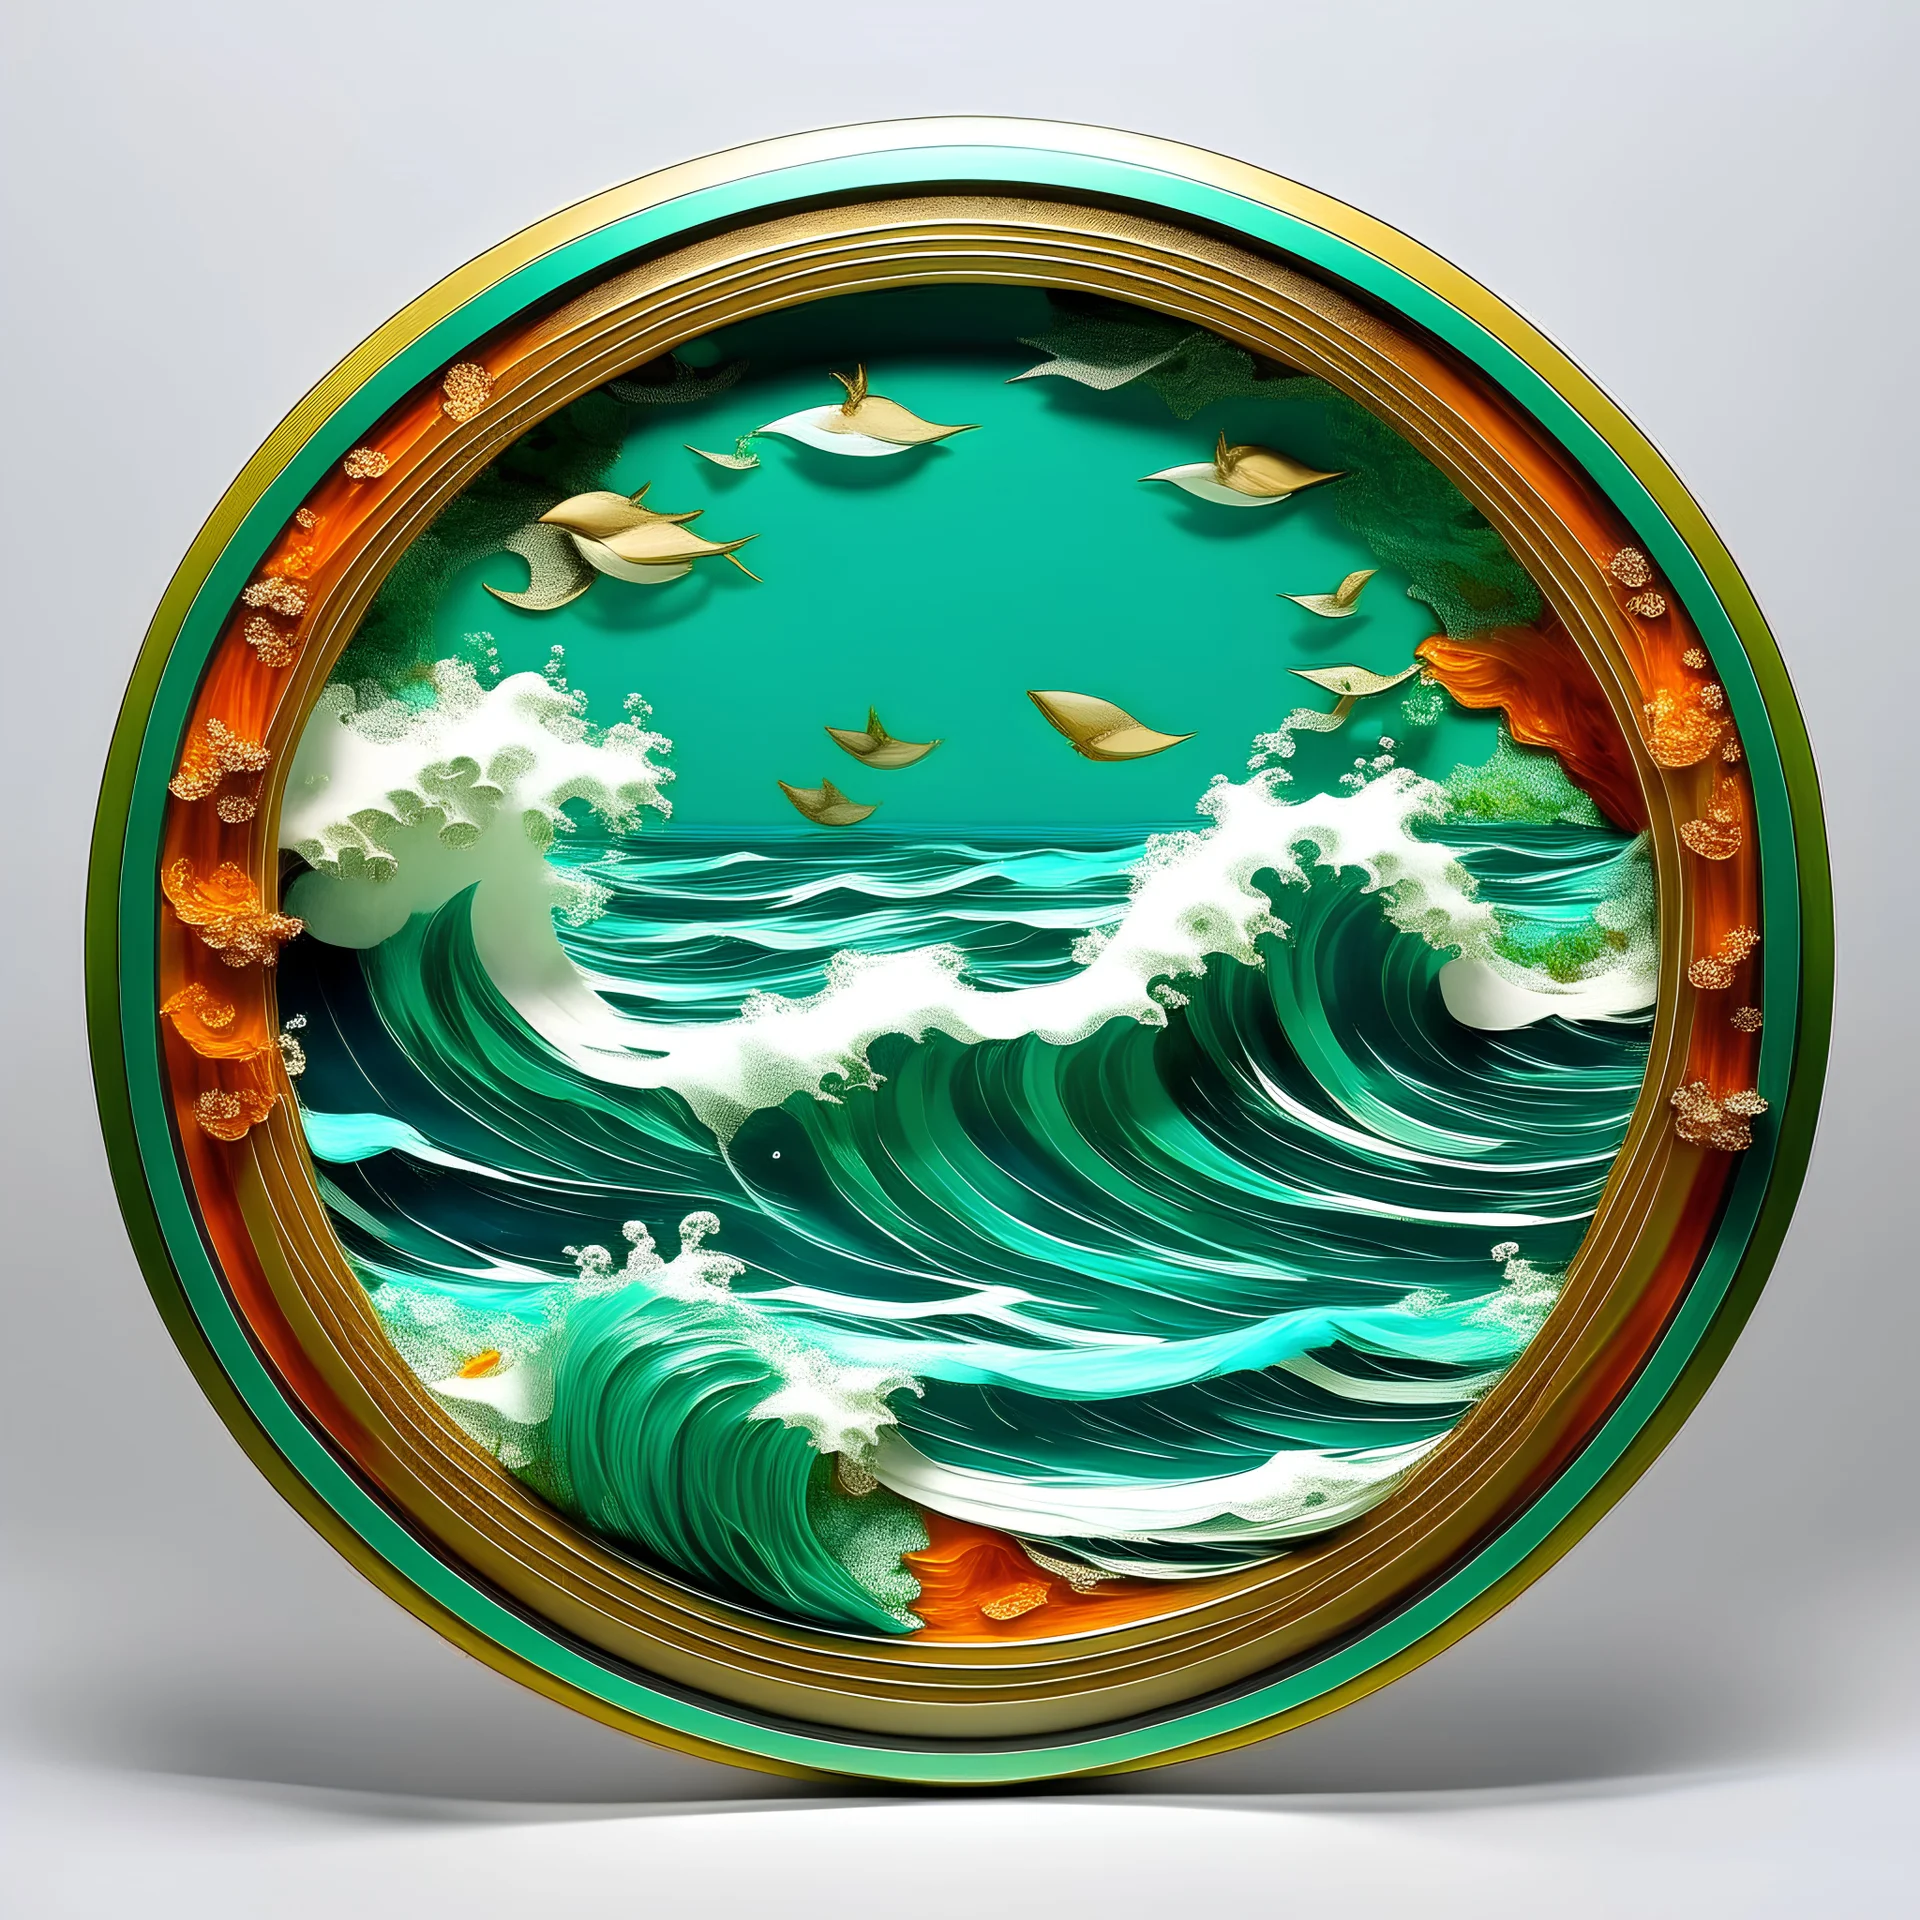 circular picture frame, scene of wealth and waves, bottom half underwater, top half out of water, showing the money and gold, the great unknown,, friendship and cooperation, light blue tones with green and orange